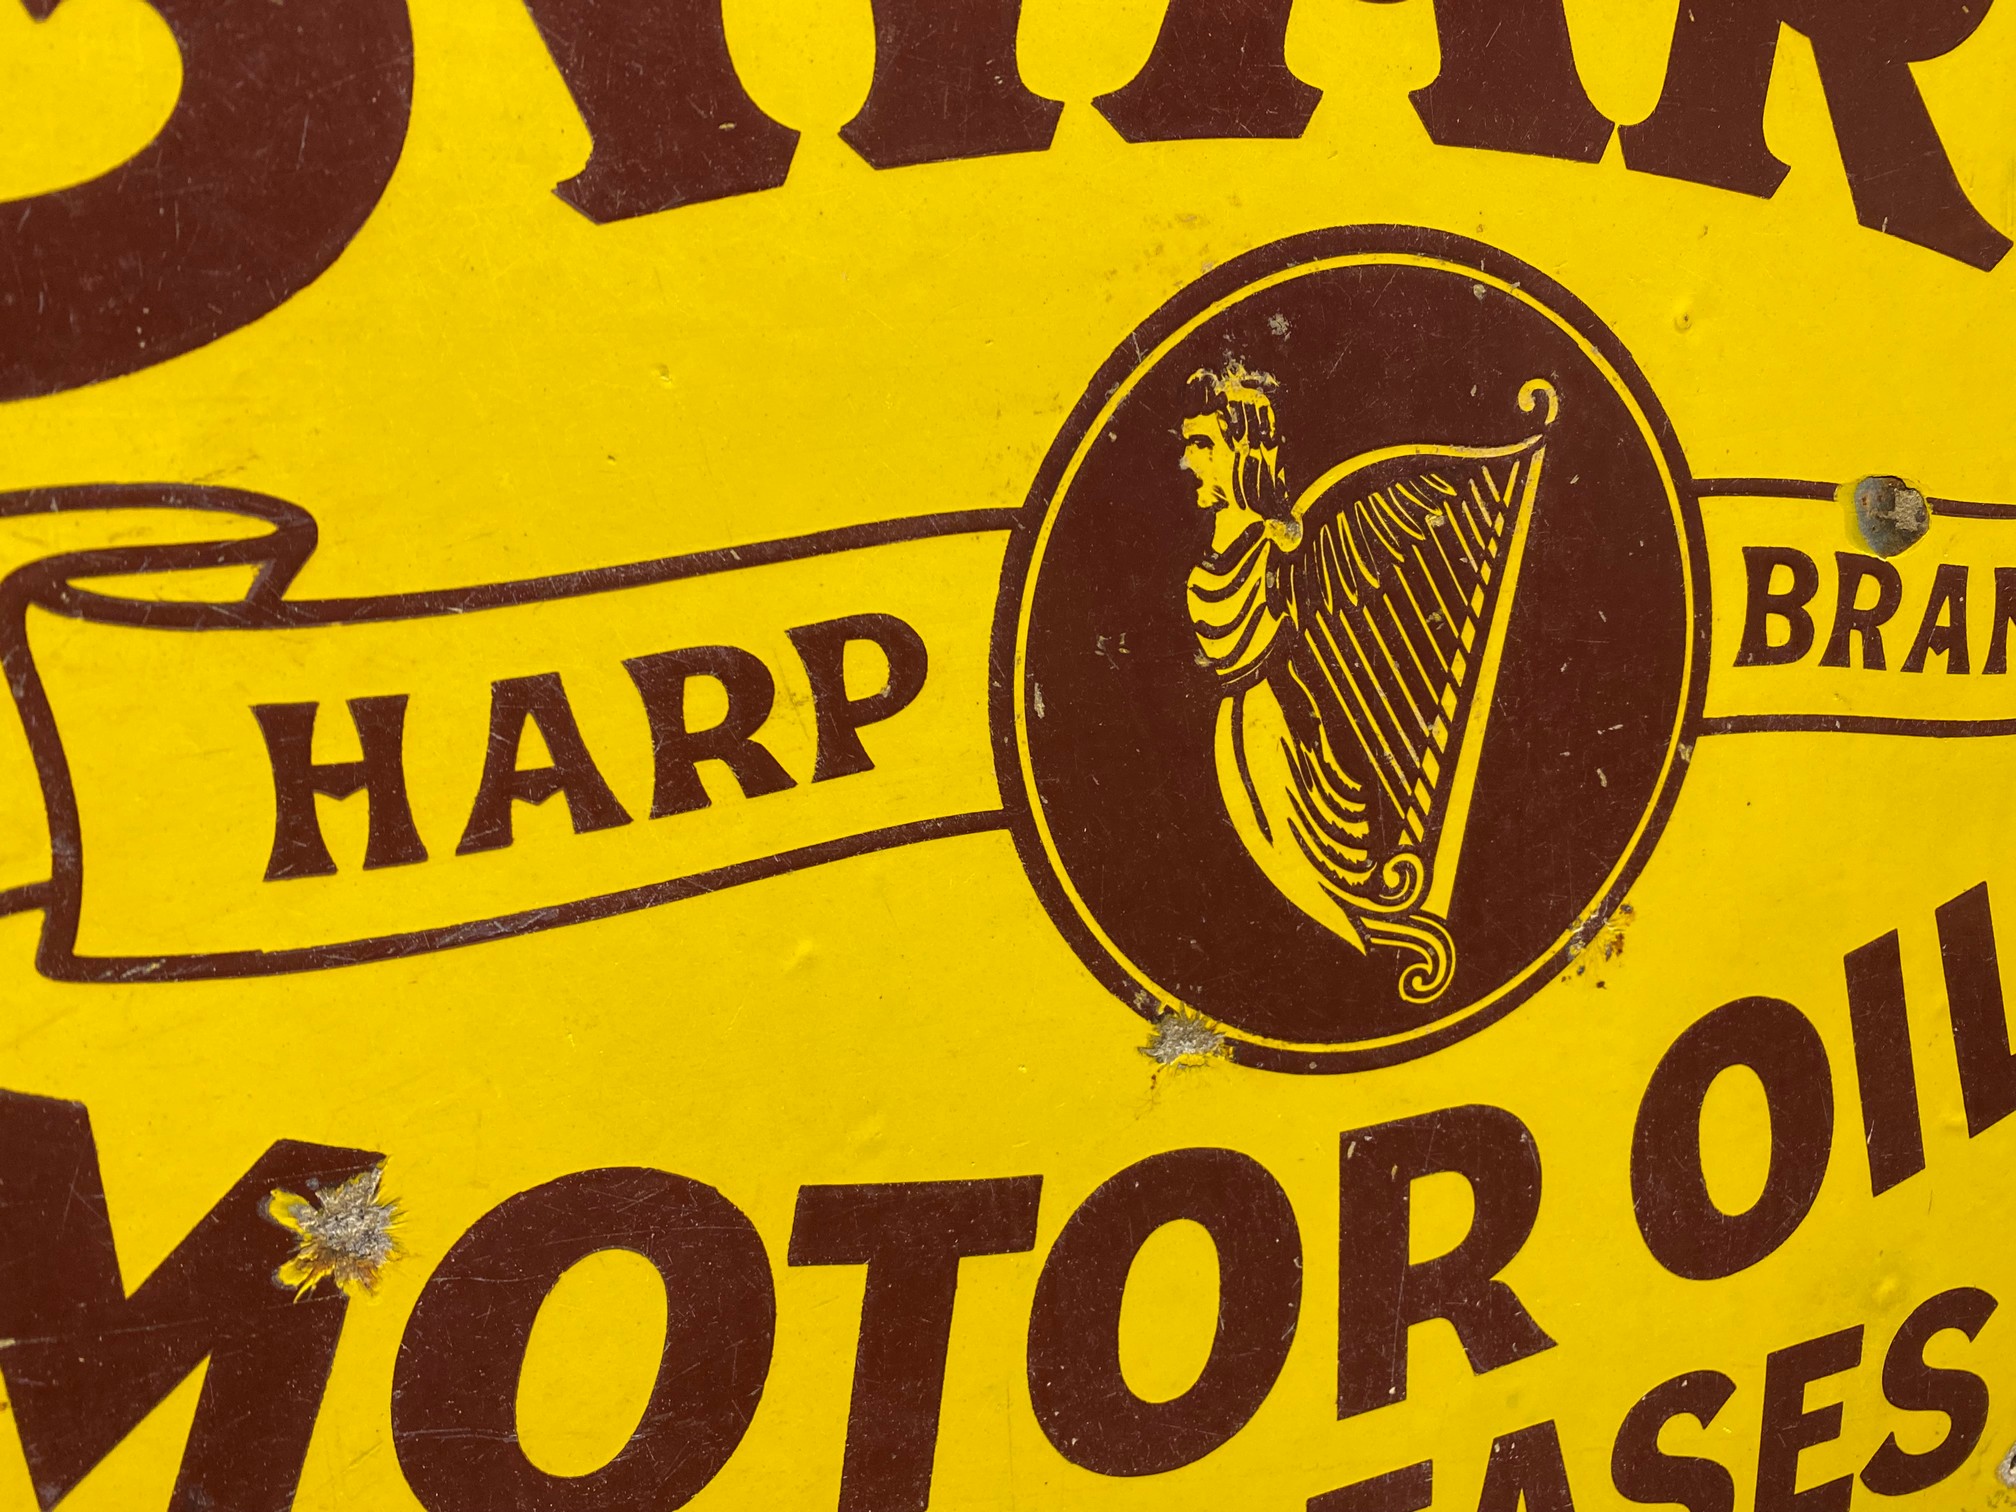 A SWARC Harp Brand Motor Oils and Greases double sided enamel sign, 20 x 16". - Image 6 of 6